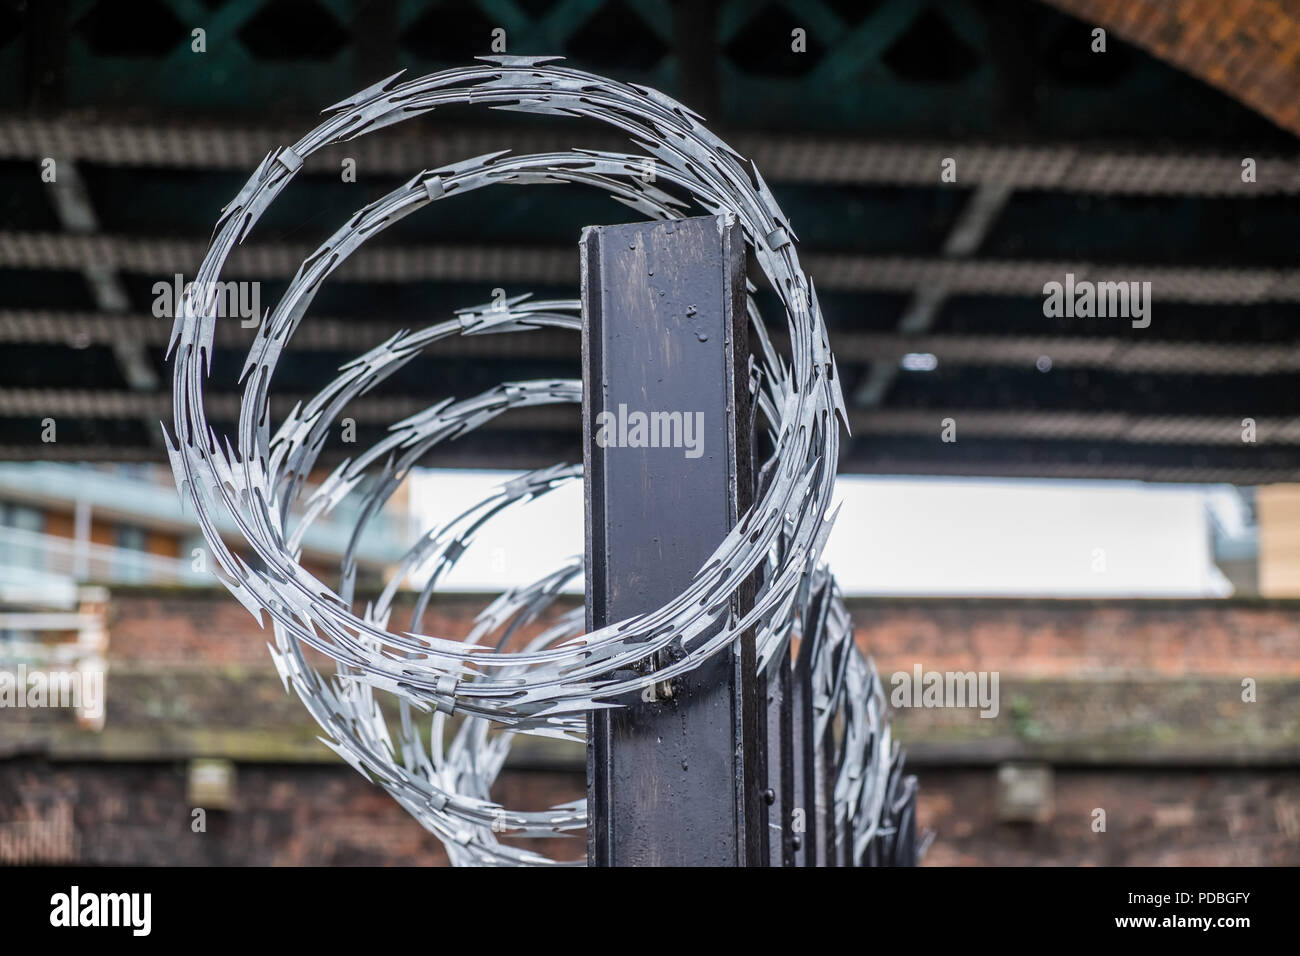 Razor wire on top of metal fencing used as a deterrent to keep people out of the premises. Stock Photo